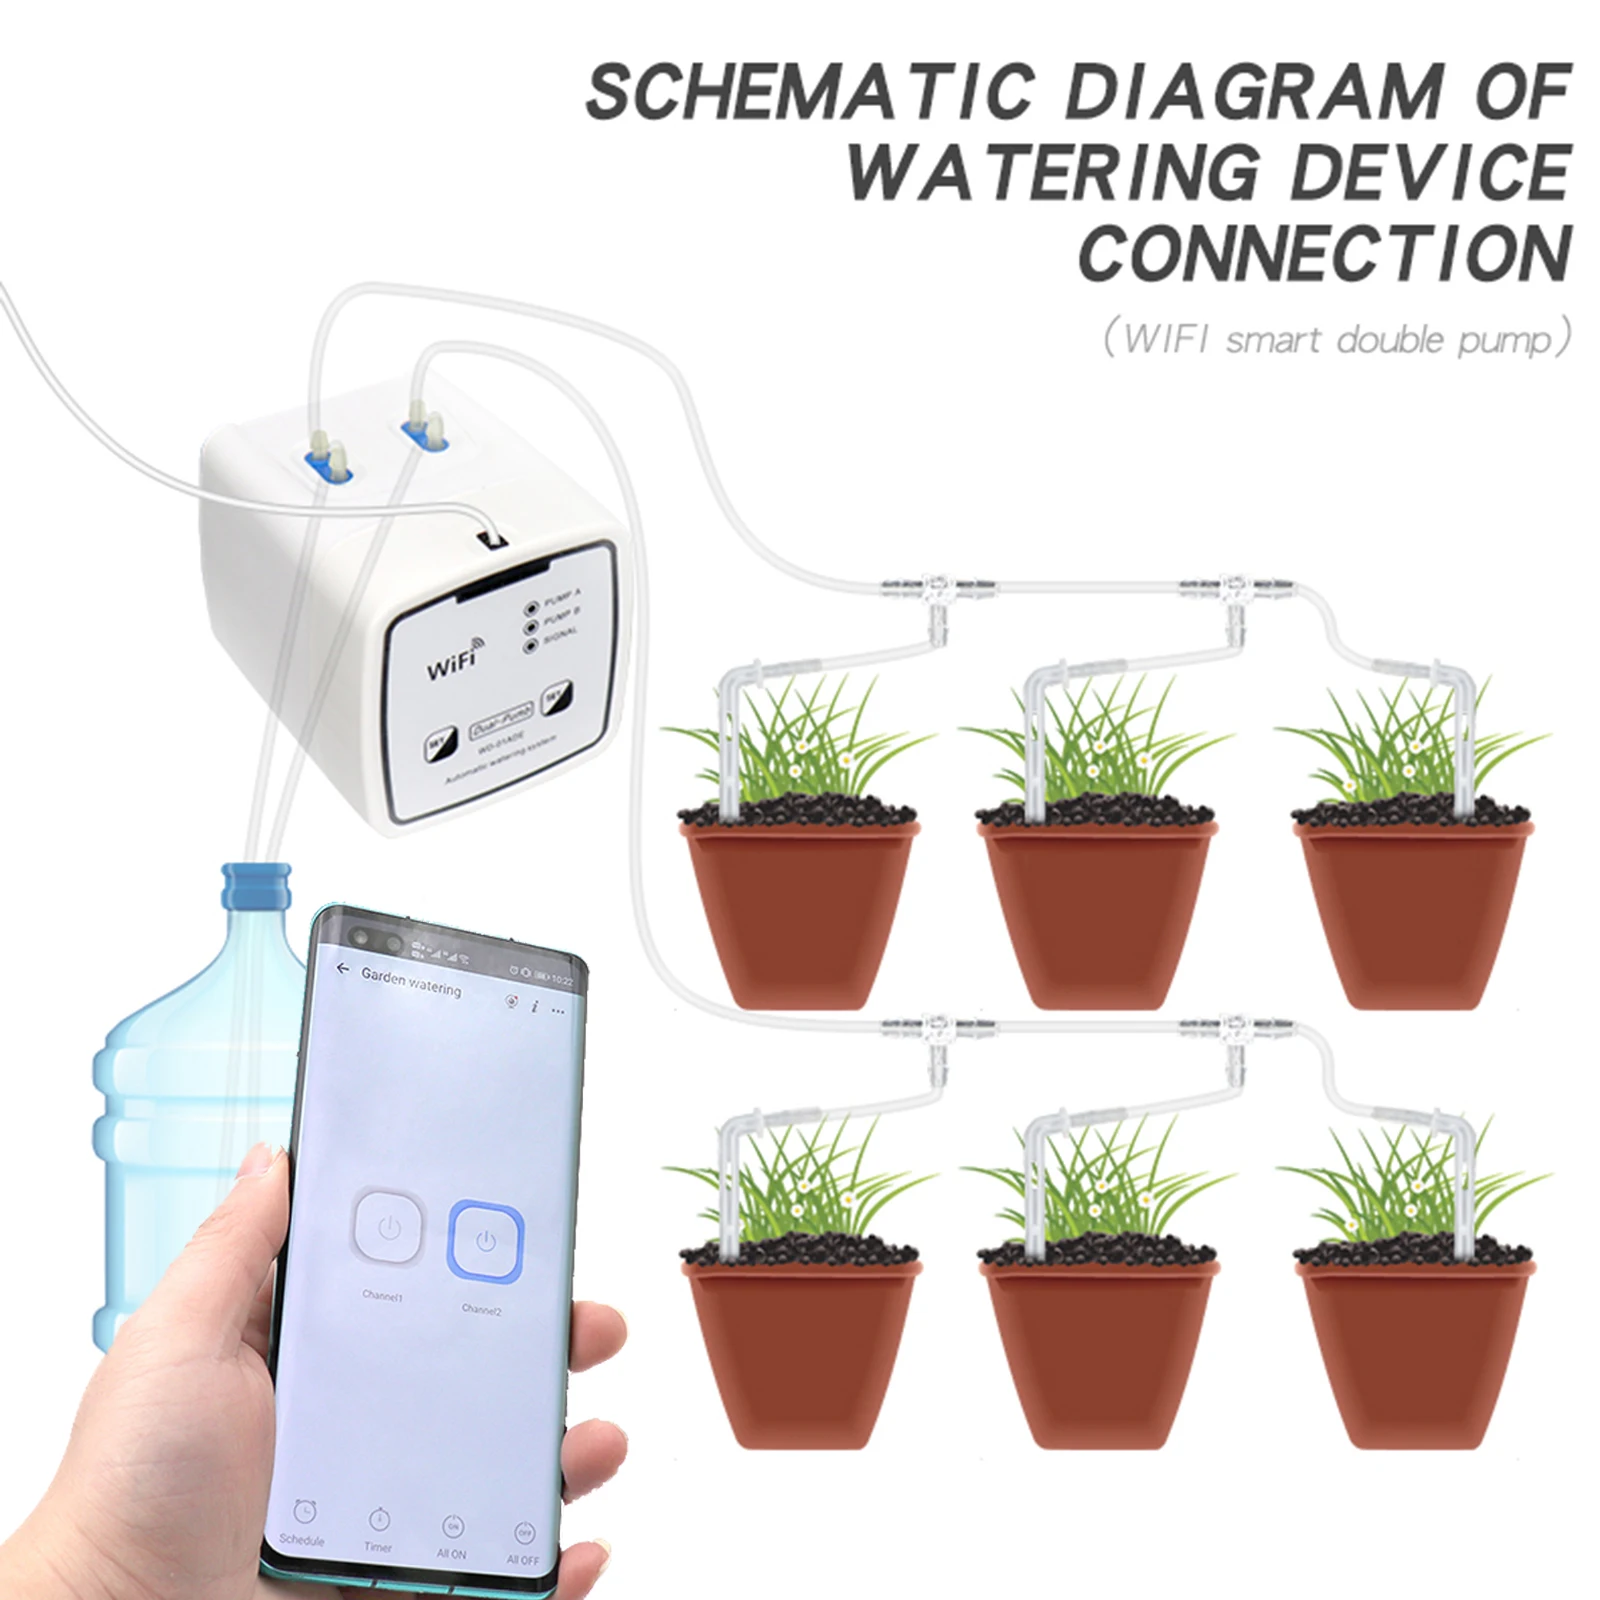 Double Pump Garden Wifi Control Watering Device Smart Automatic Water Drip Irrigation Watering System Kit WIFI APP Control New